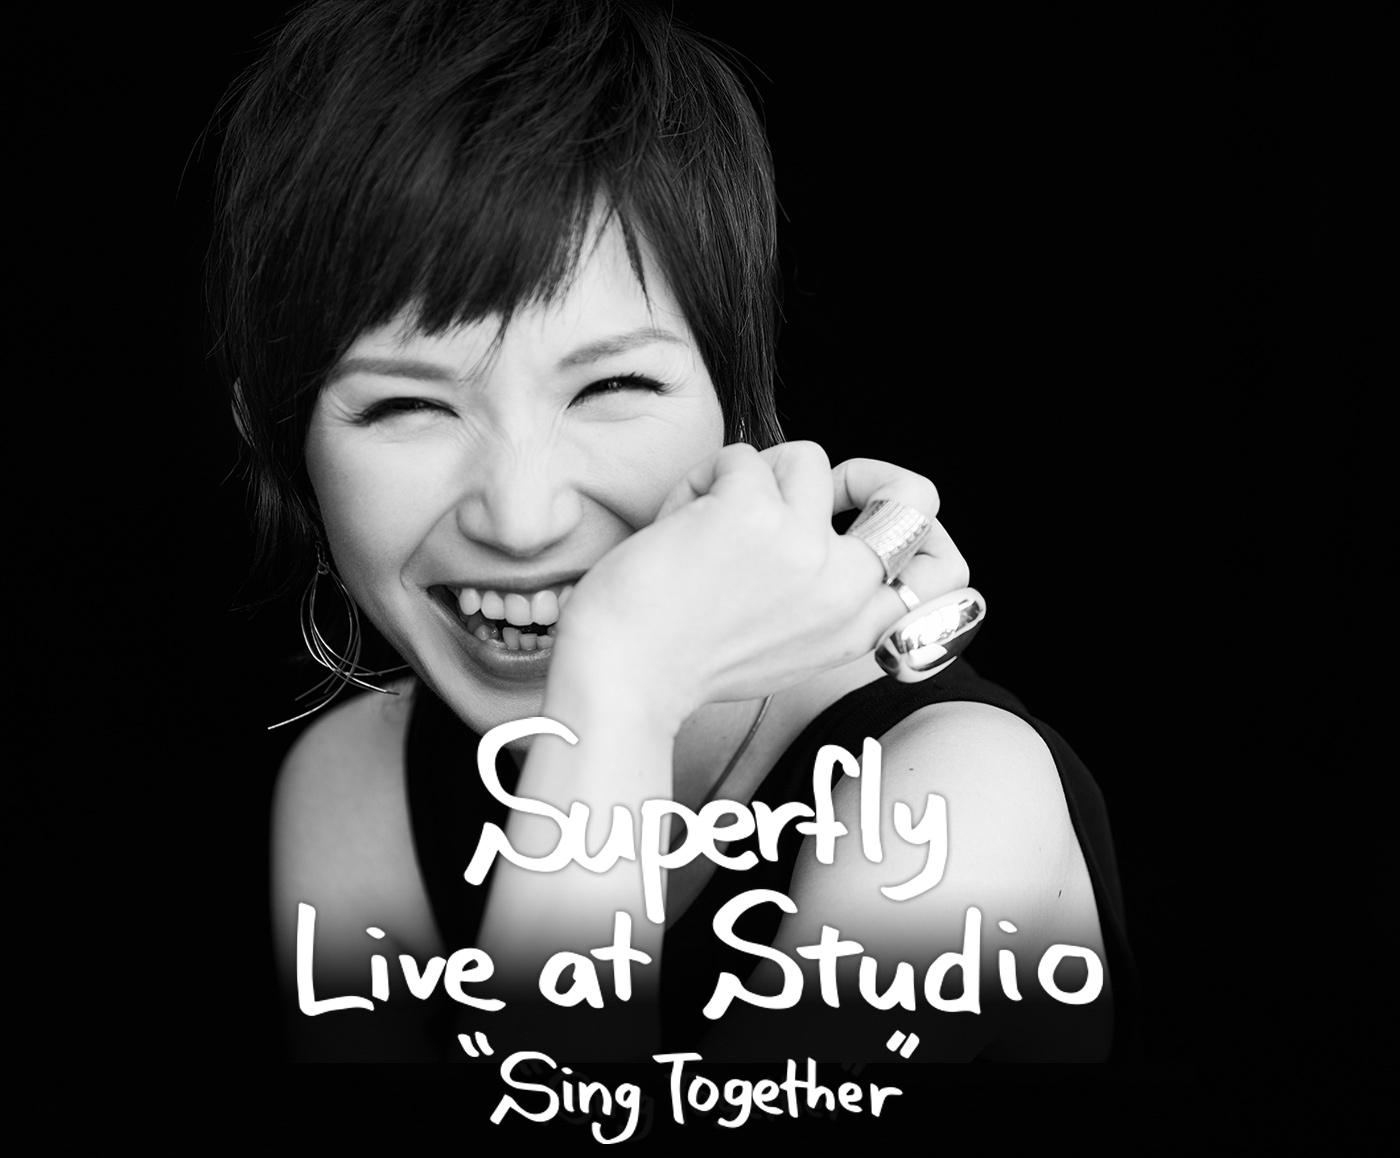 Superfly オンラインライブ「Superfly Live at Studio Sing Together」